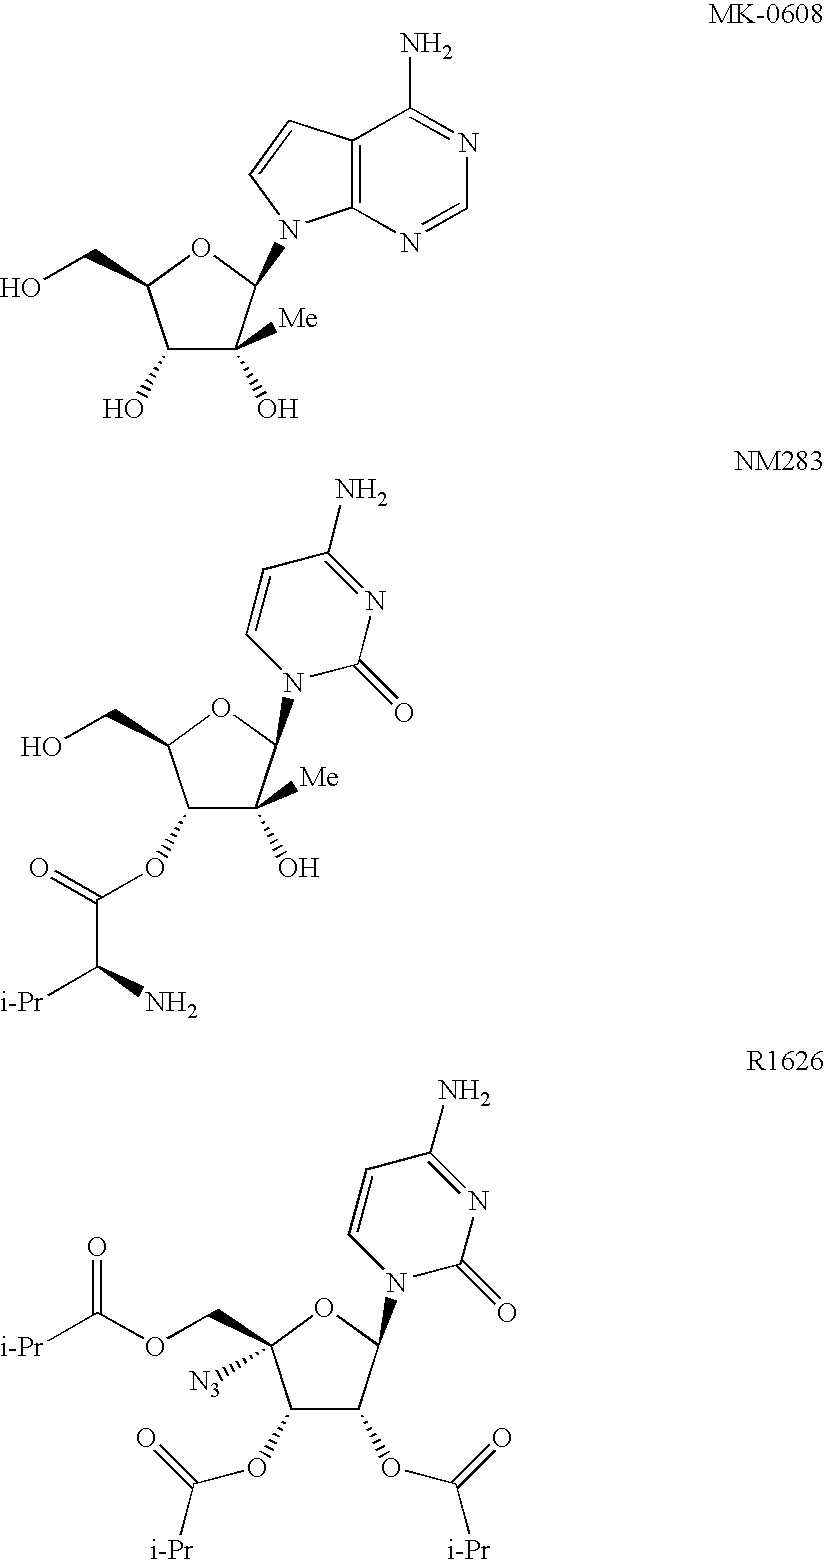 Nucleoside prodrugs and uses thereof